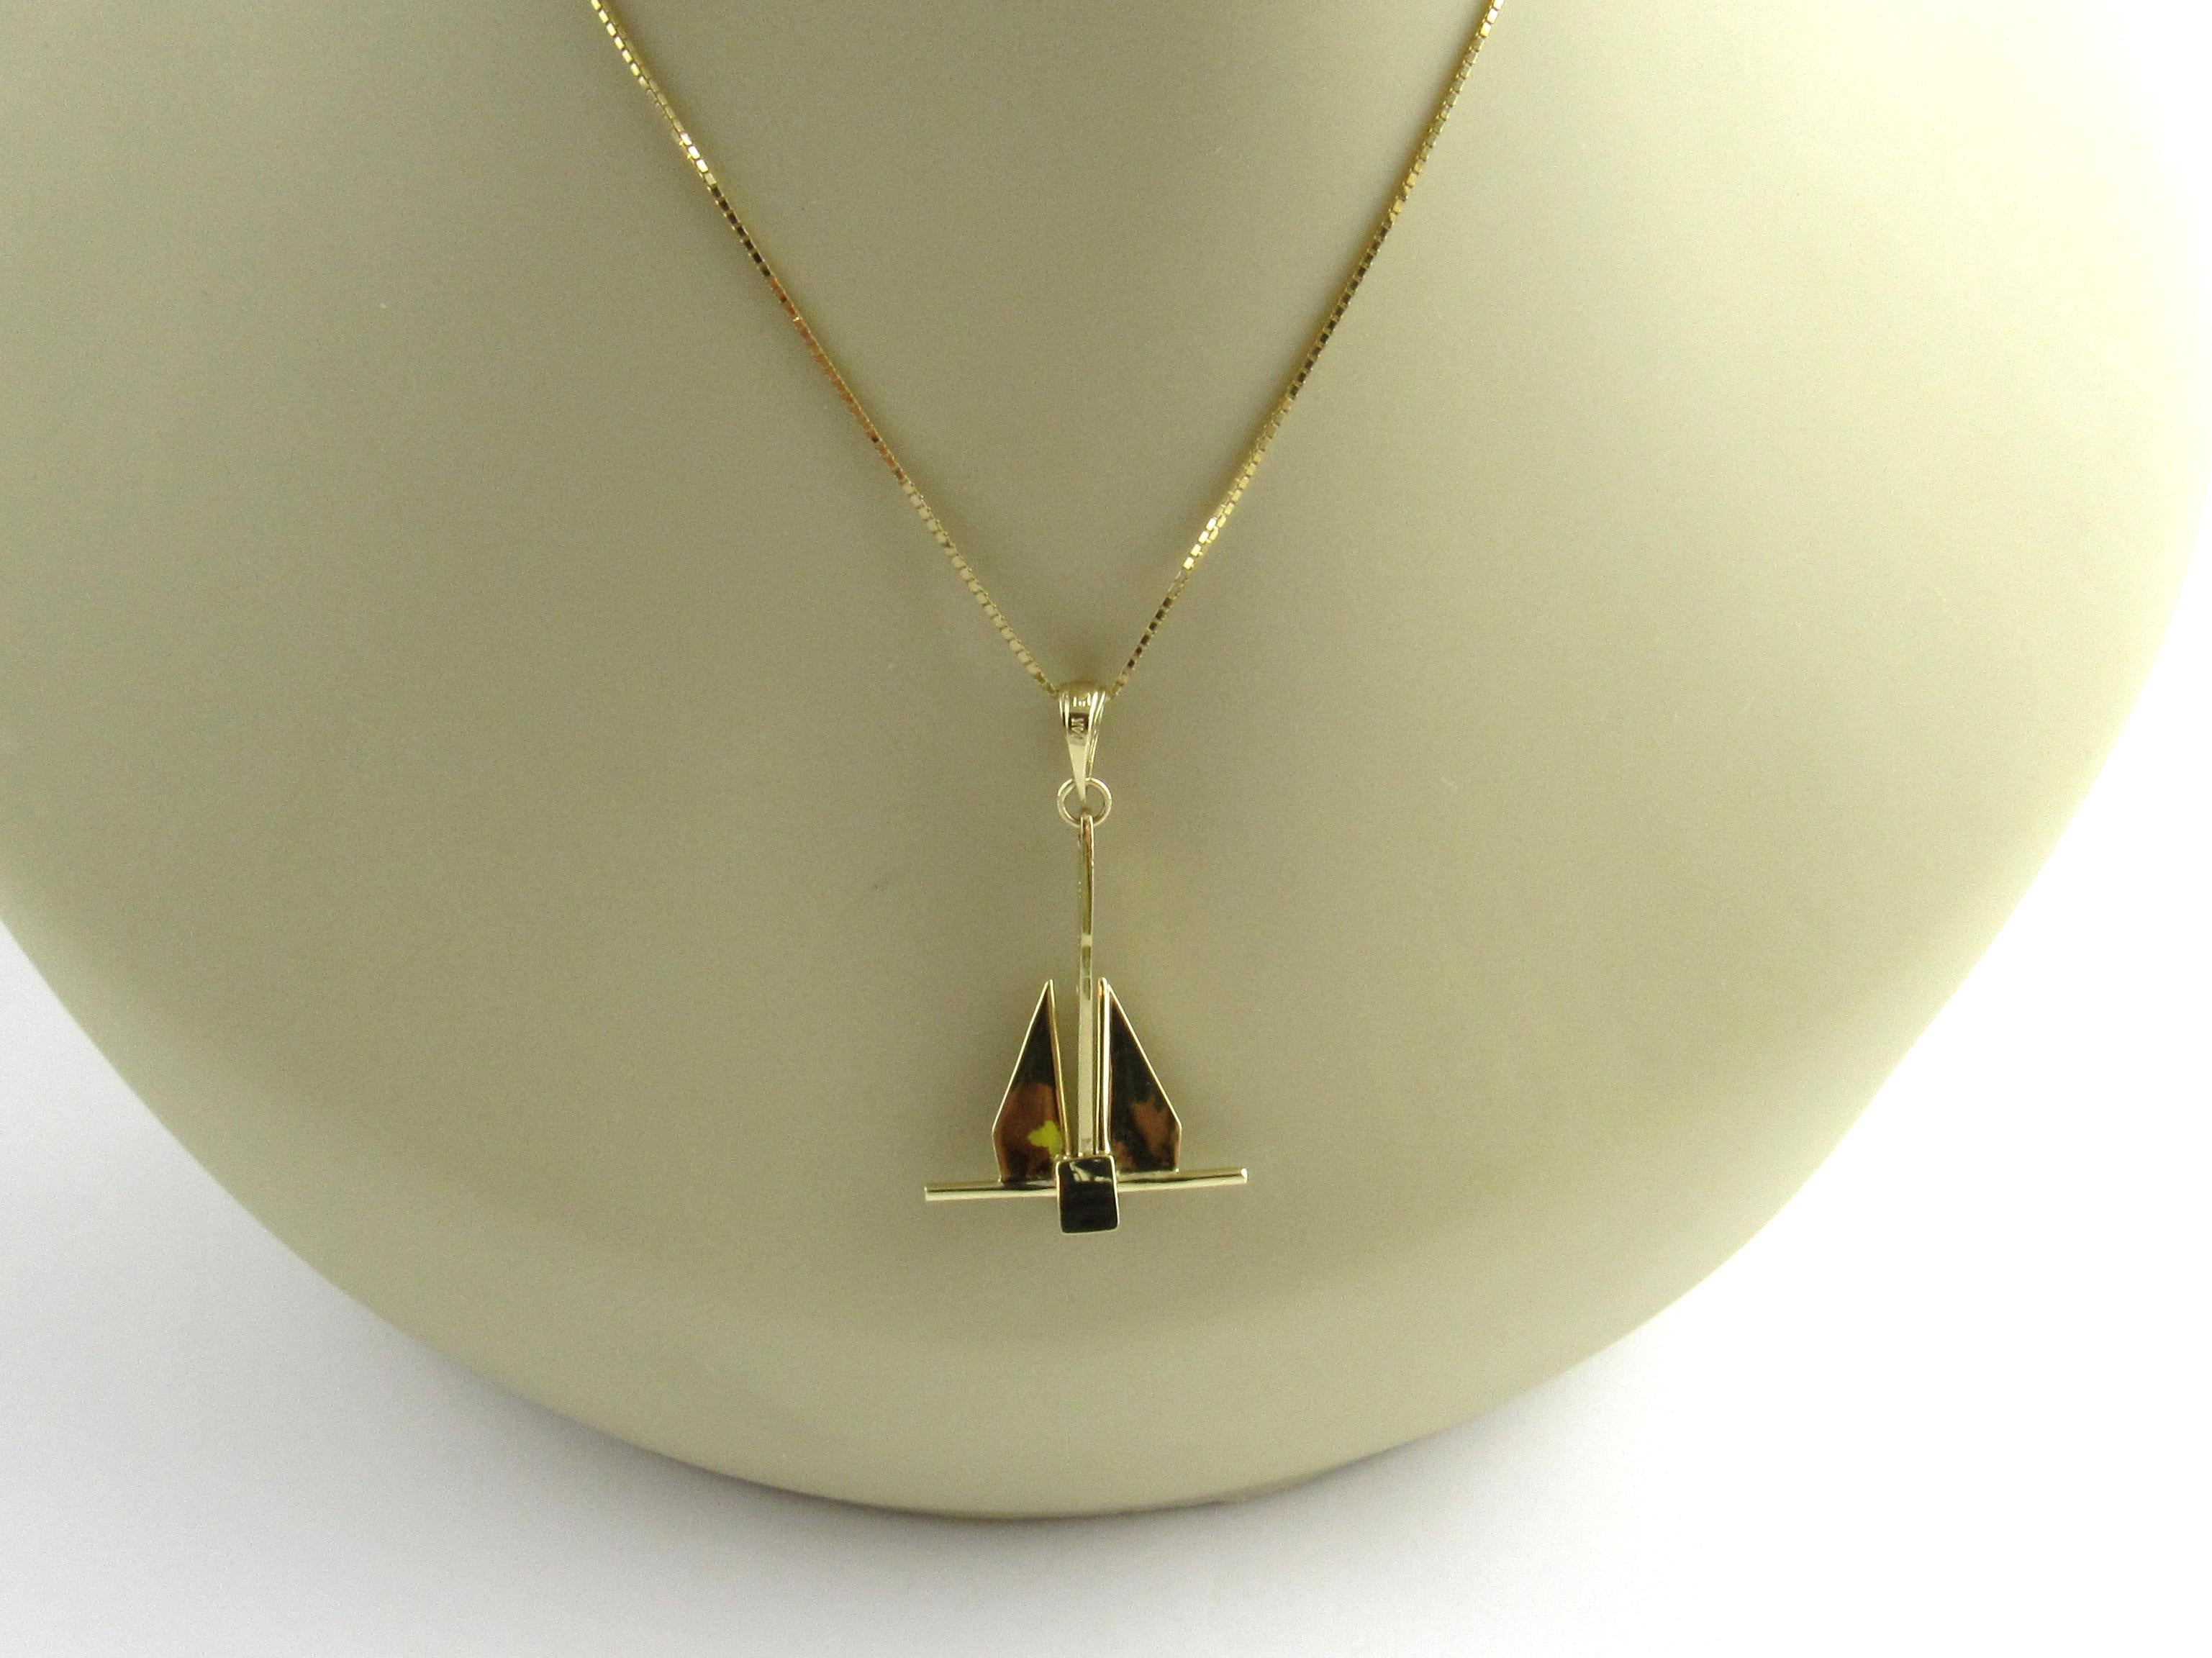 14 Karat Yellow Gold Anchor with Movable Stock Pendant For Sale 2